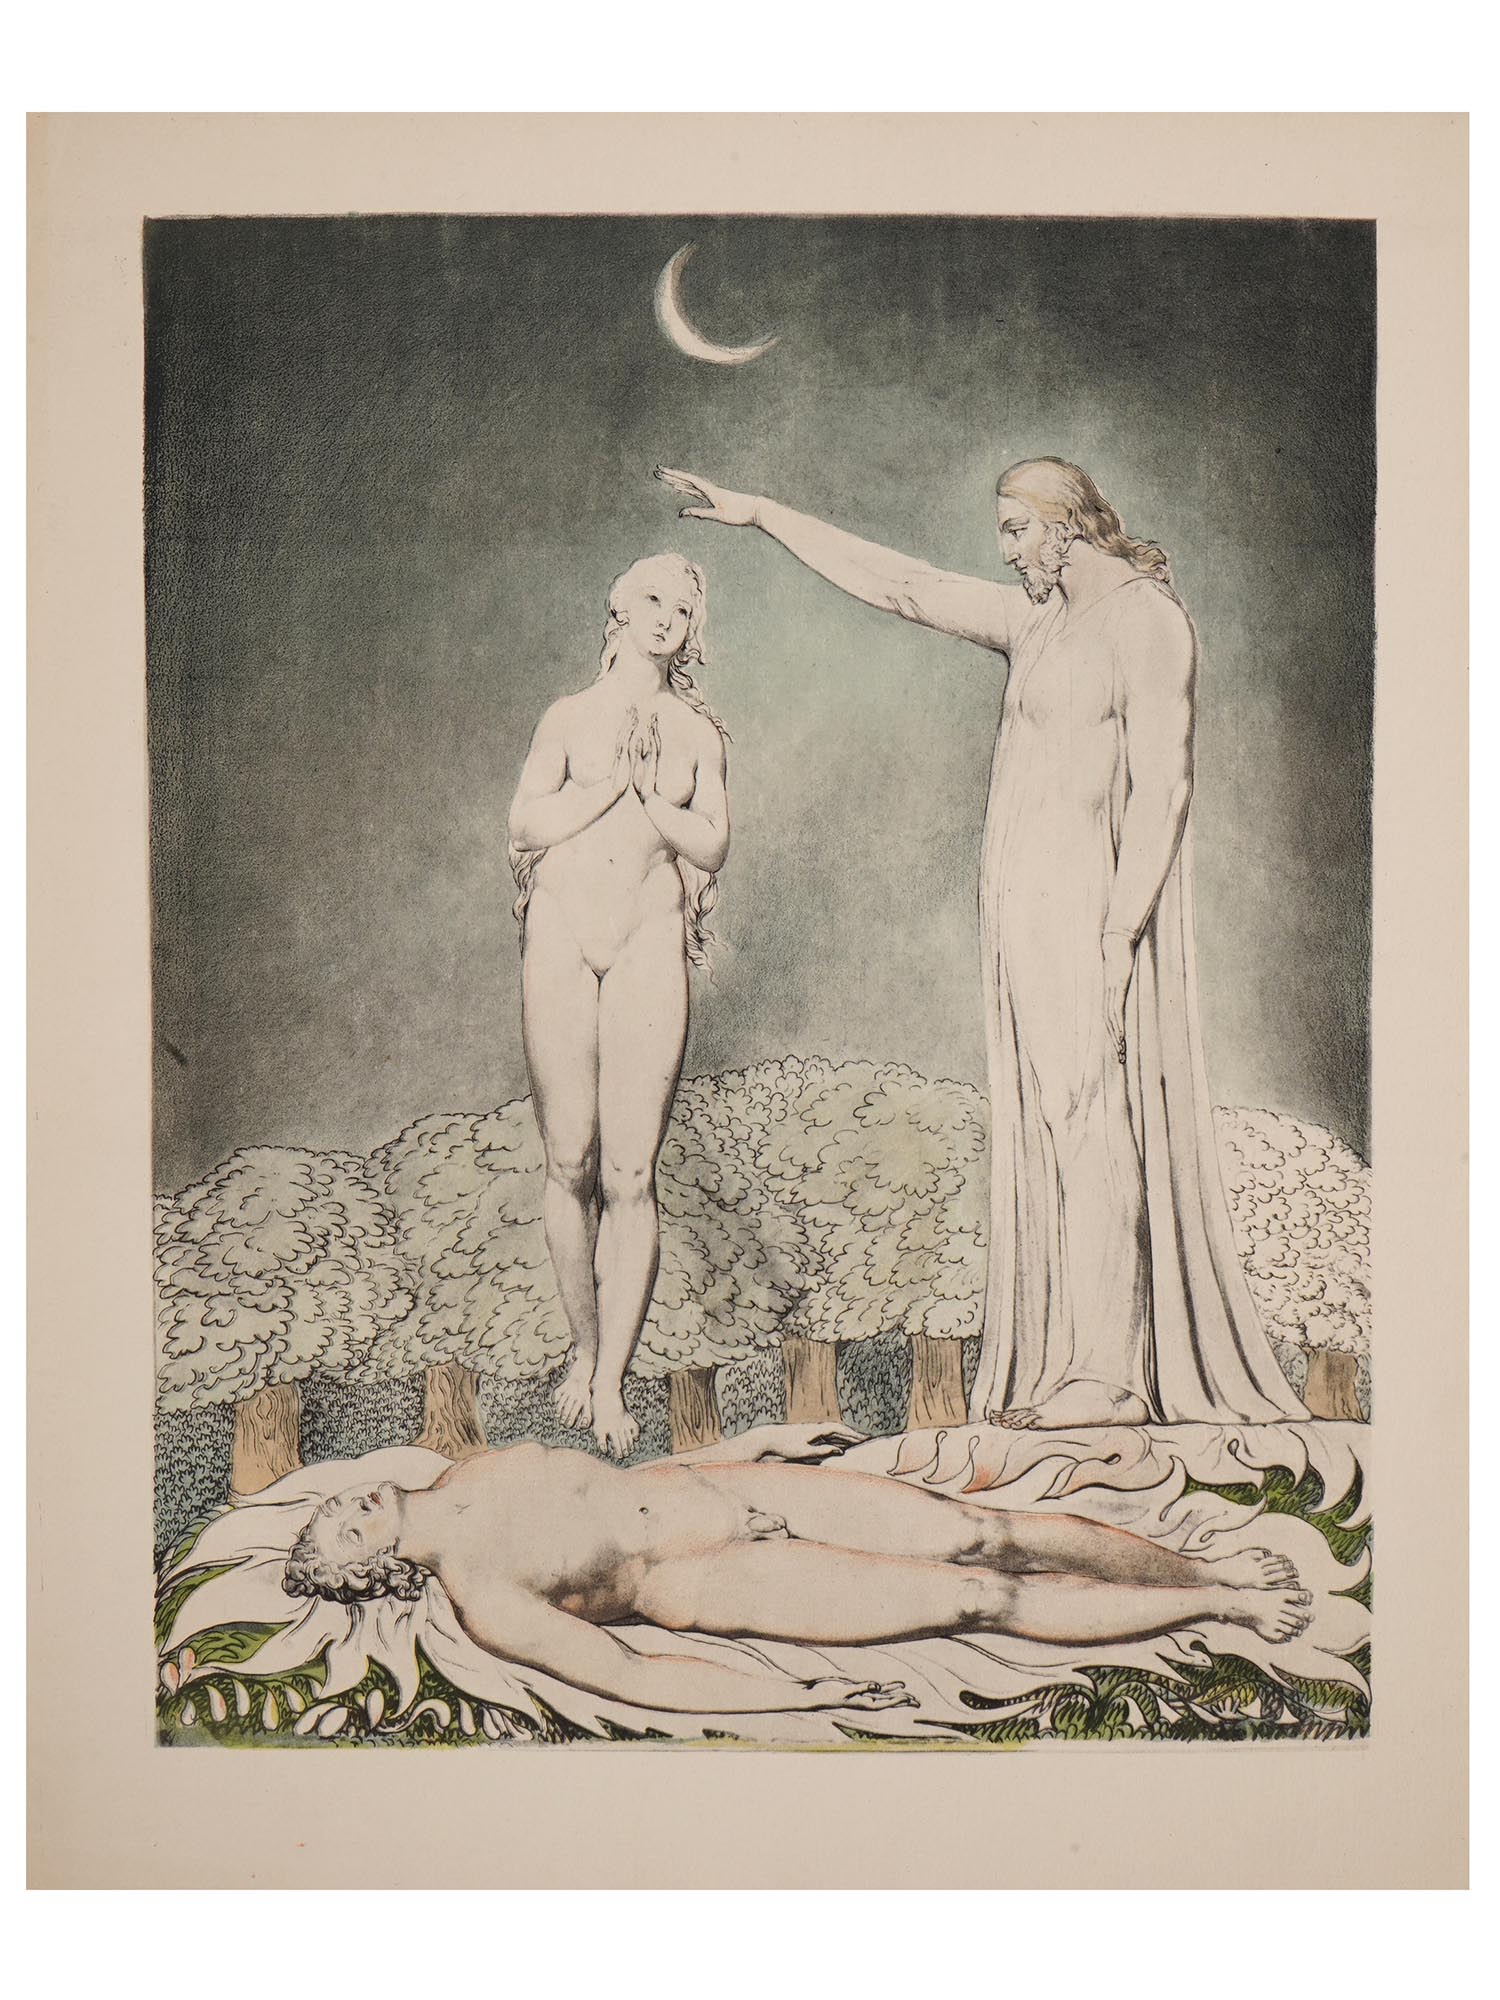 RELIGIOUS ENGLISH COLORED PRINT BY WILLIAM BLAKE PIC-0